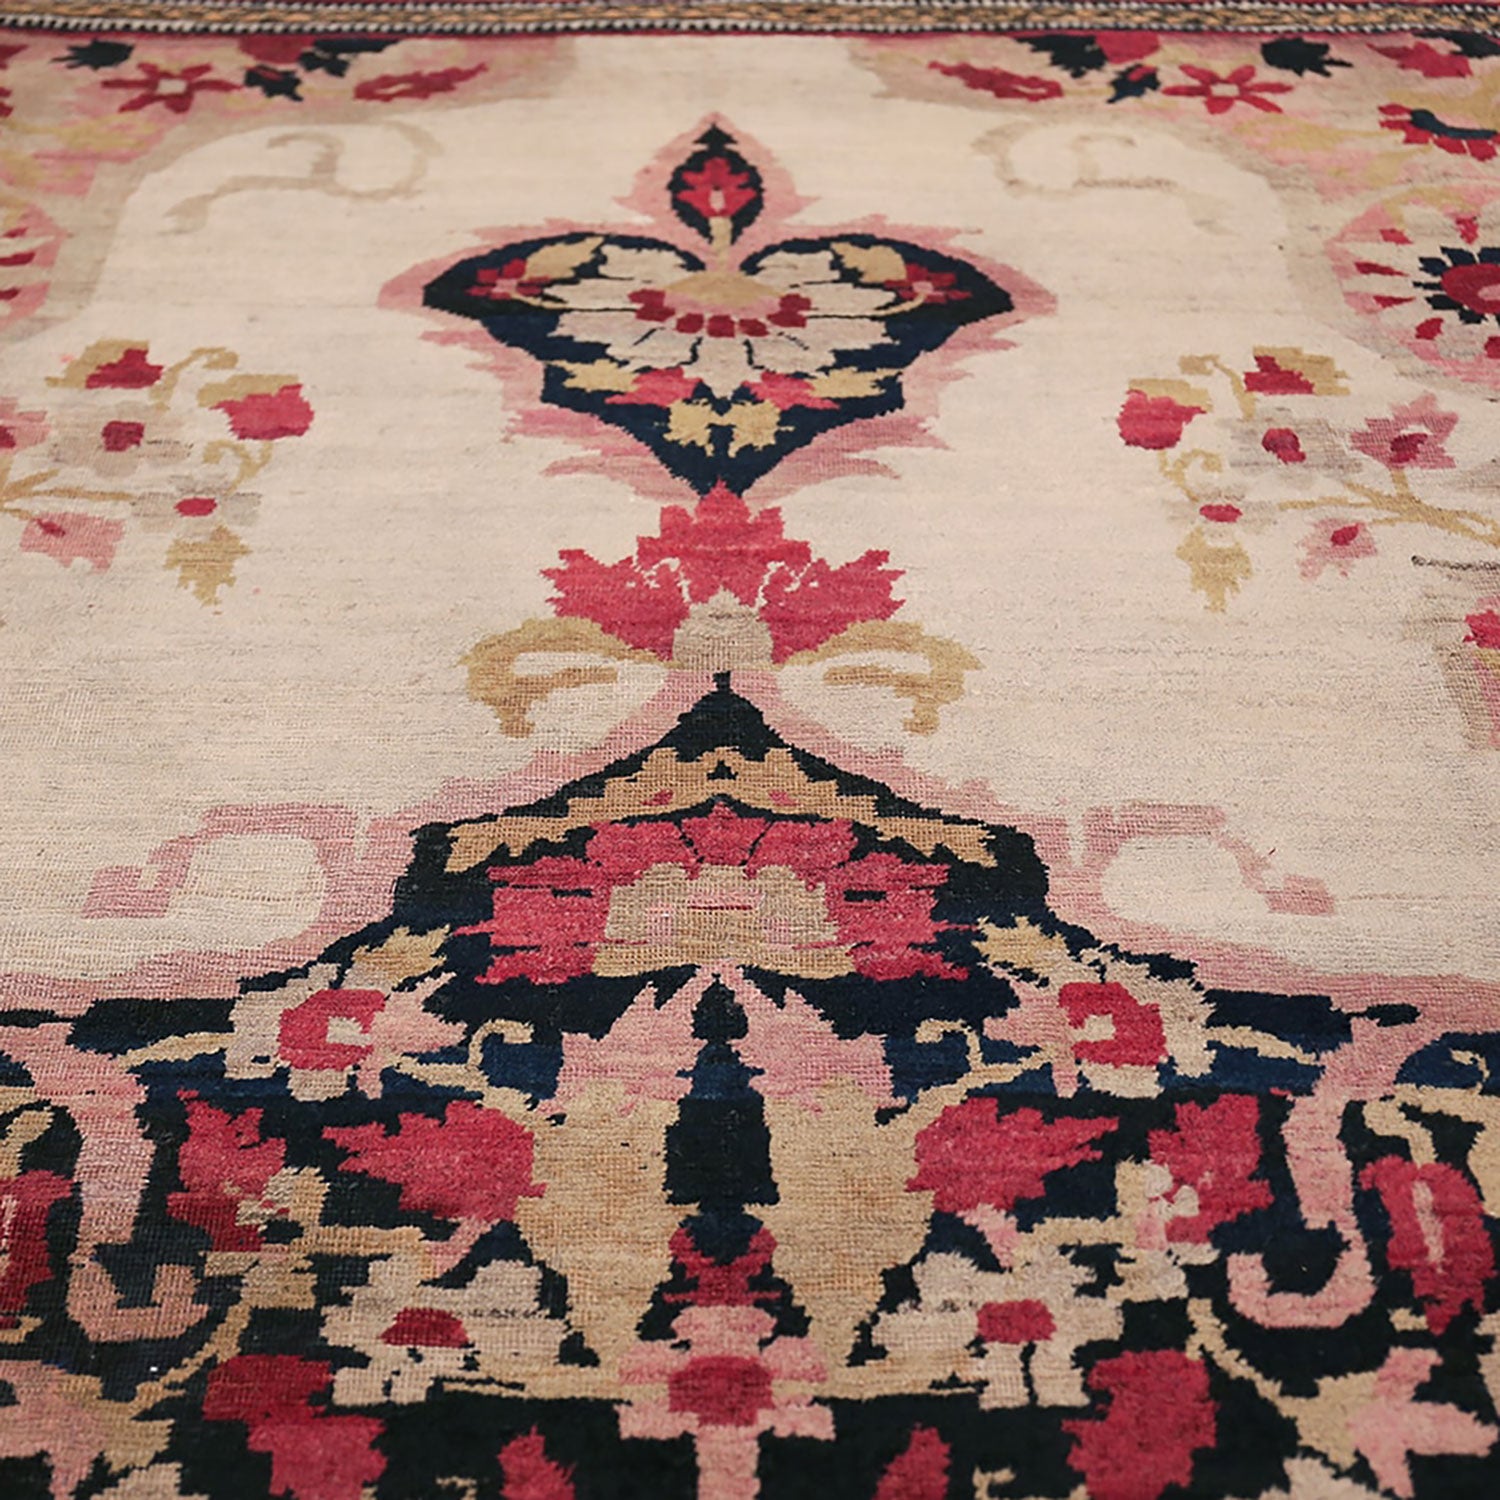 Close-up of an ornate rug with intricate symmetrical patterns.